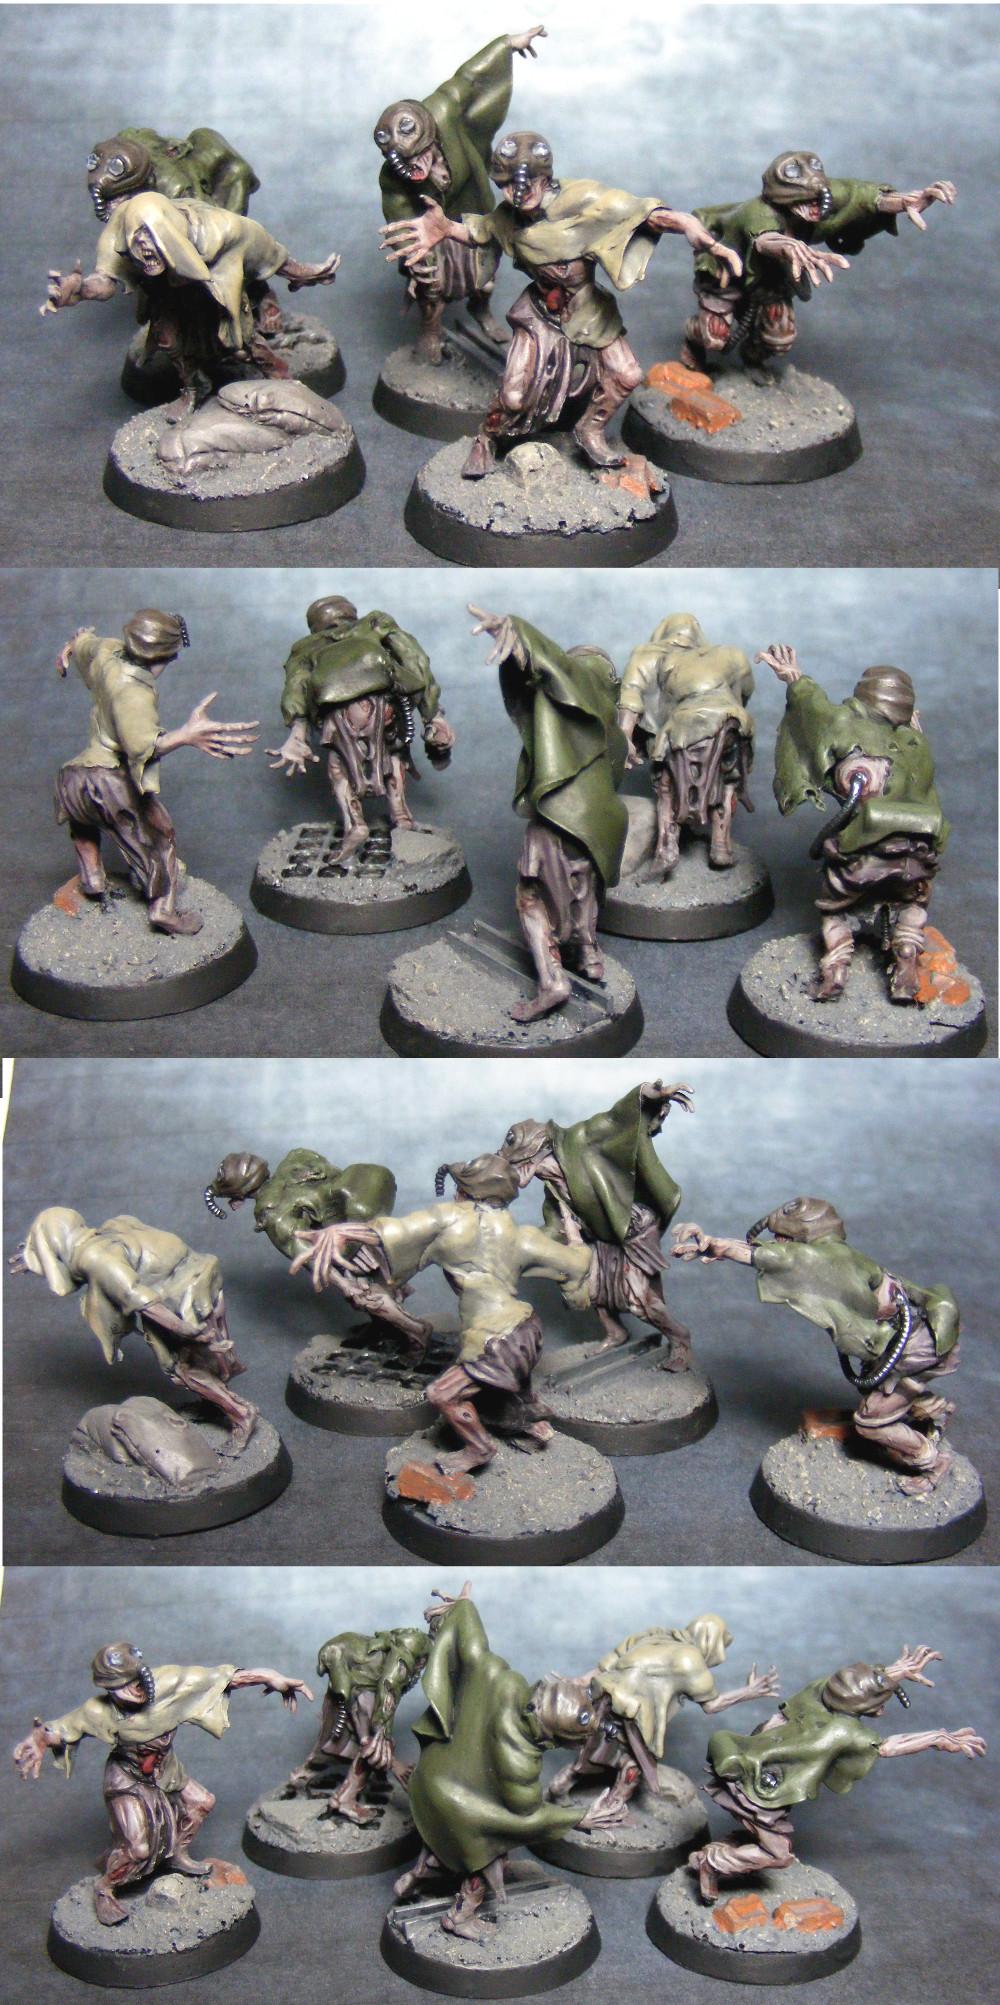 5 (Snorks) Zombies nearly finished